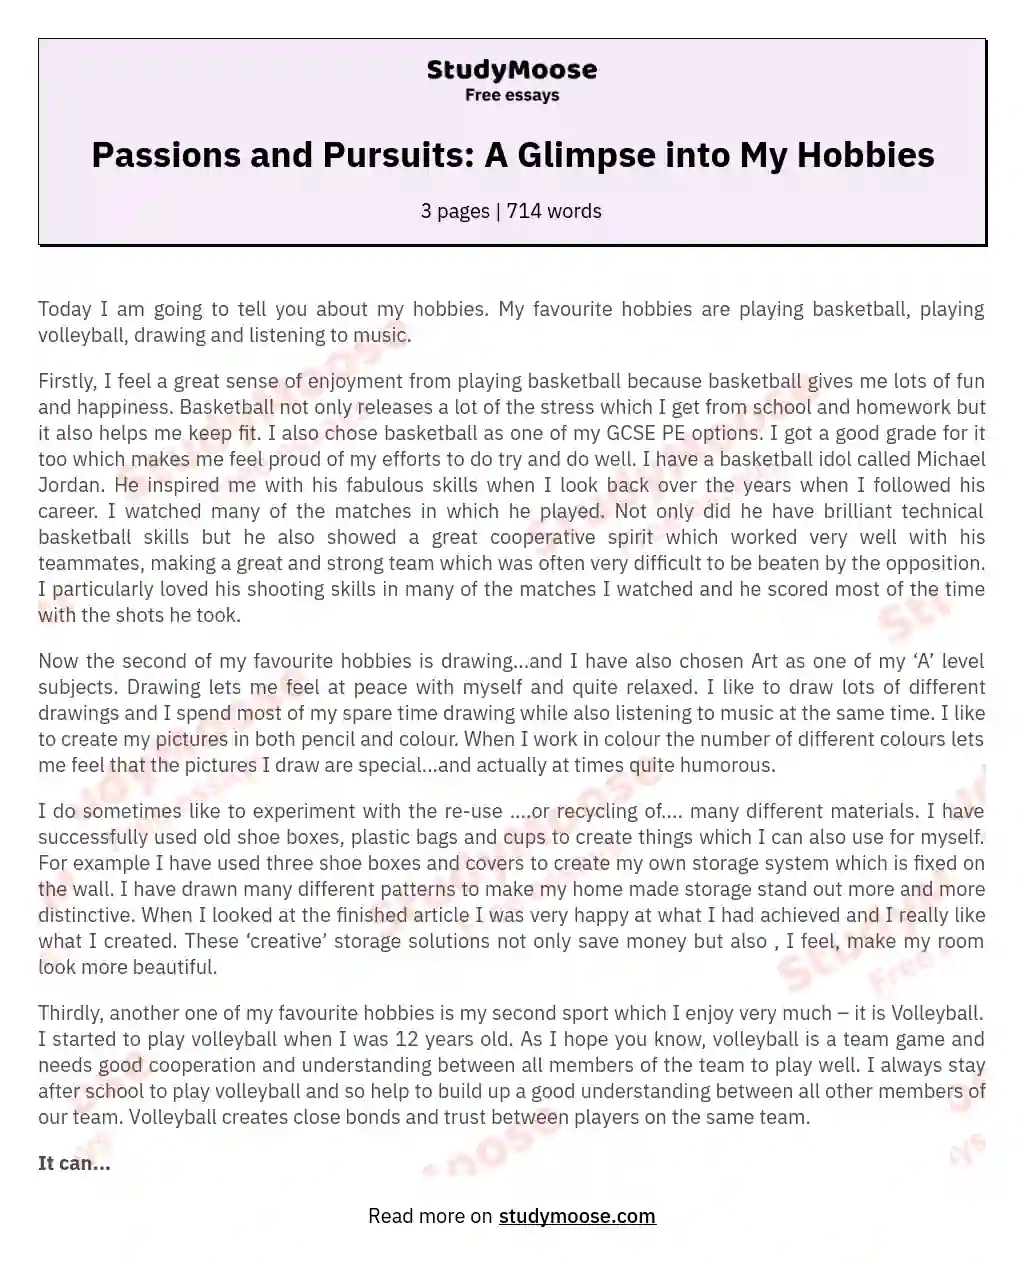 Passions and Pursuits: A Glimpse into My Hobbies essay